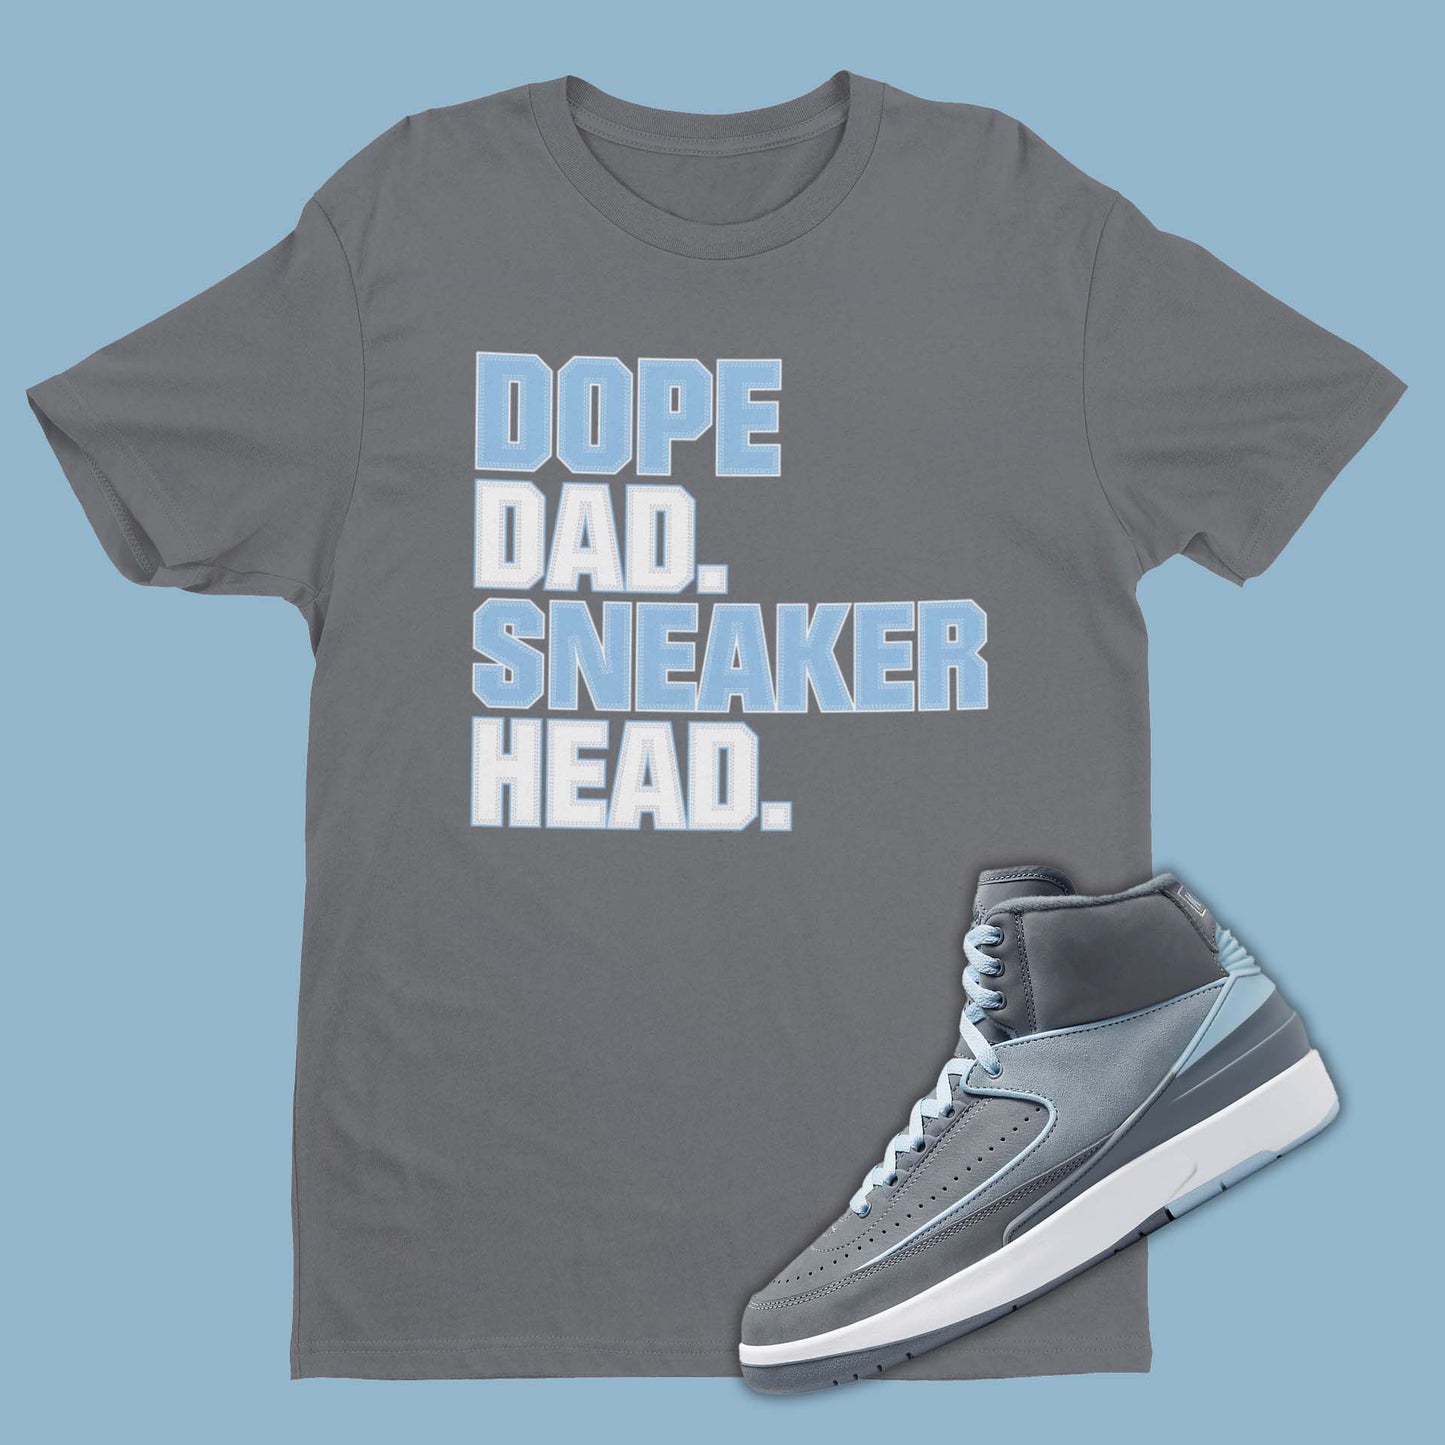 Grey t-shirt featuring a graphic of Michael Jordan dunking, designed to complement the sleek and stylish Air Jordan 2 Cool Grey sneakers